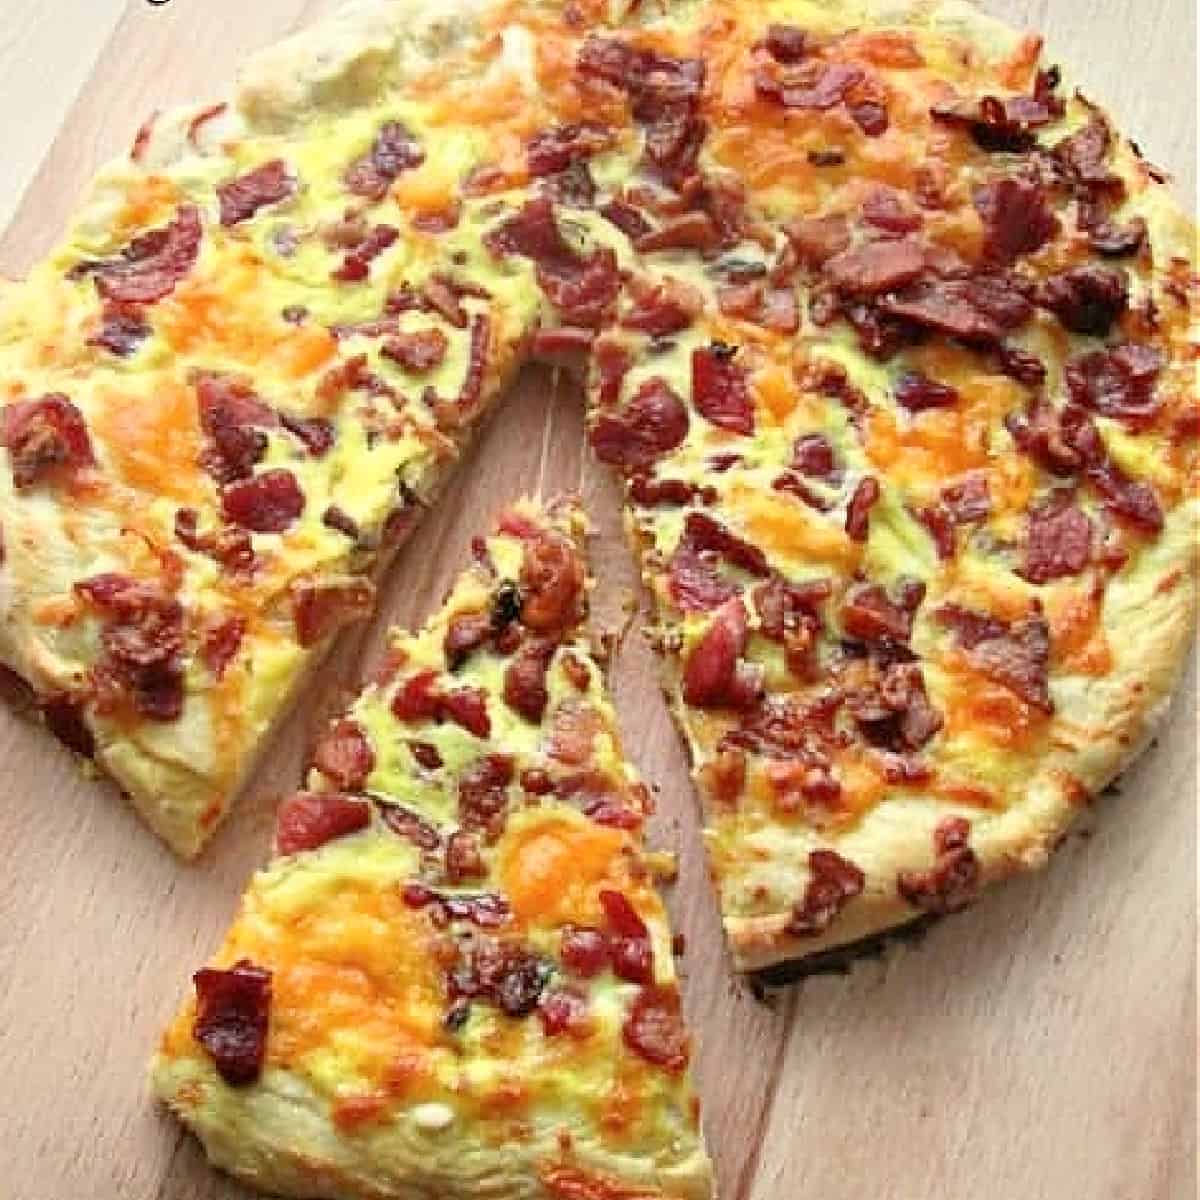 pizza loaded with bacon and cheese.